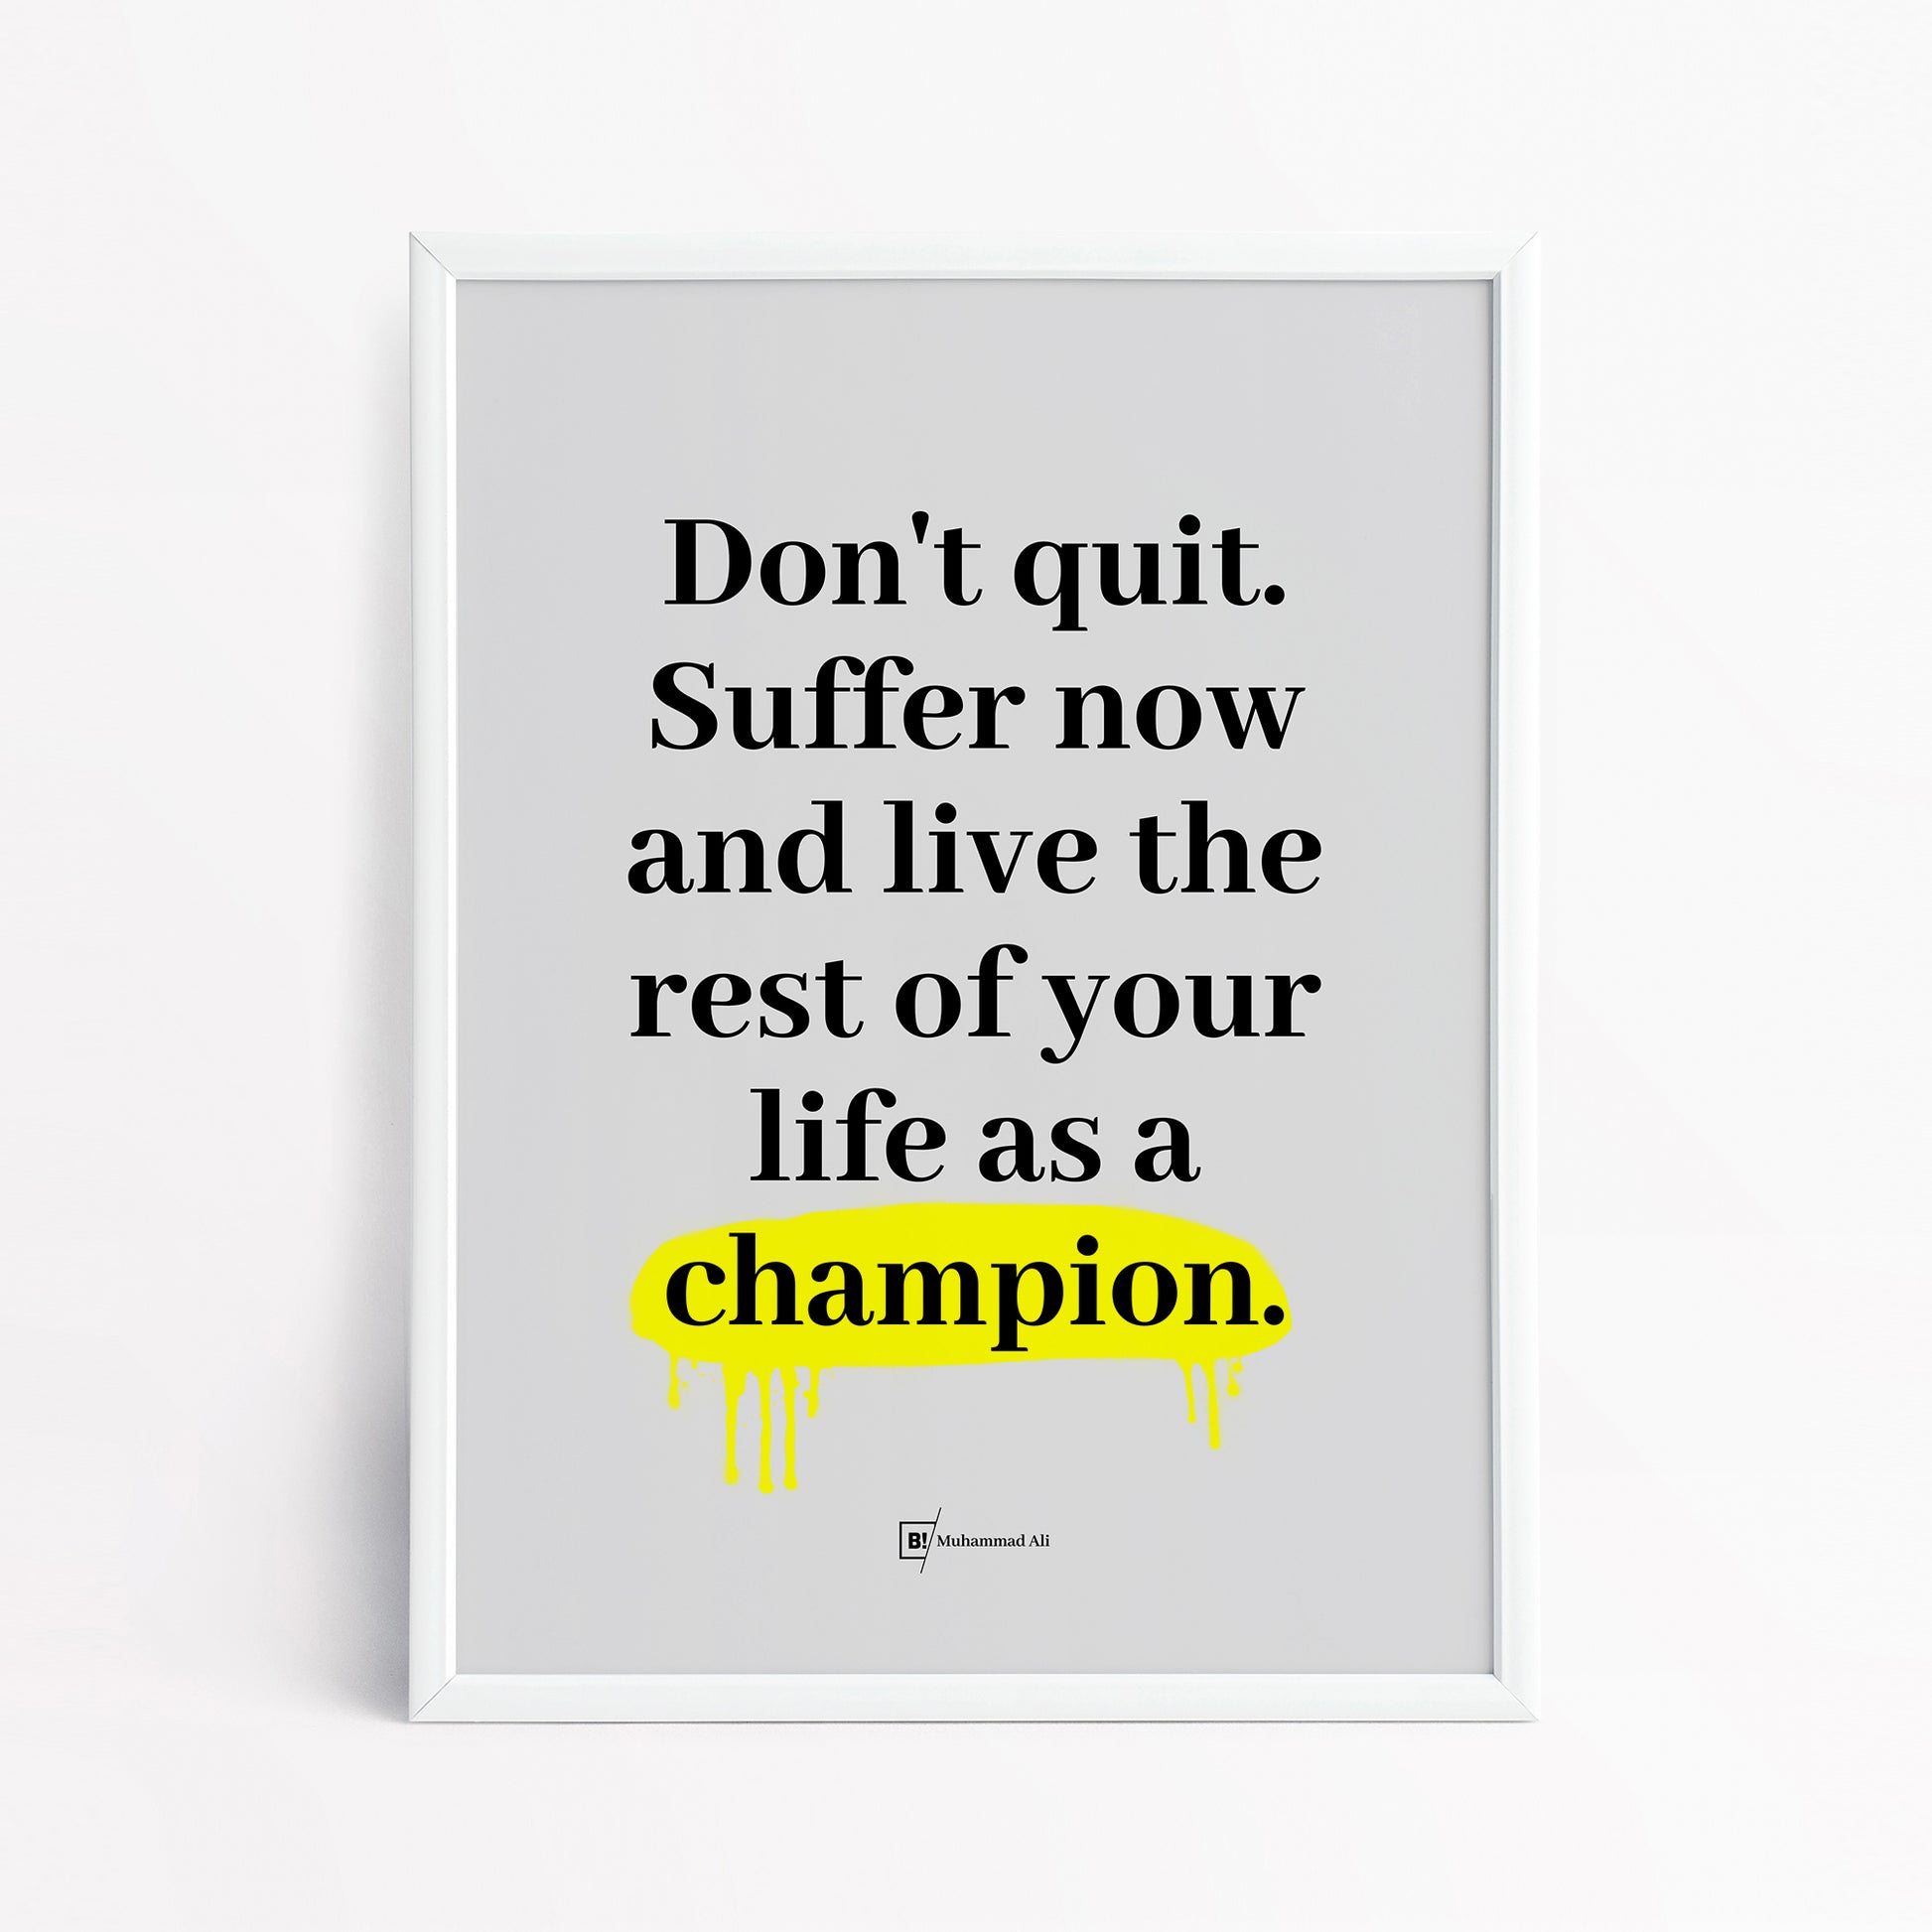 Be inspired by Muhammad Ali's famous "Don't quit. Suffer now and live the rest of your life as a champion" quote art print. This artwork was printed using the giclée process on archival acid-free paper and is presented in a simple white frame that captures its timeless beauty in every detail.